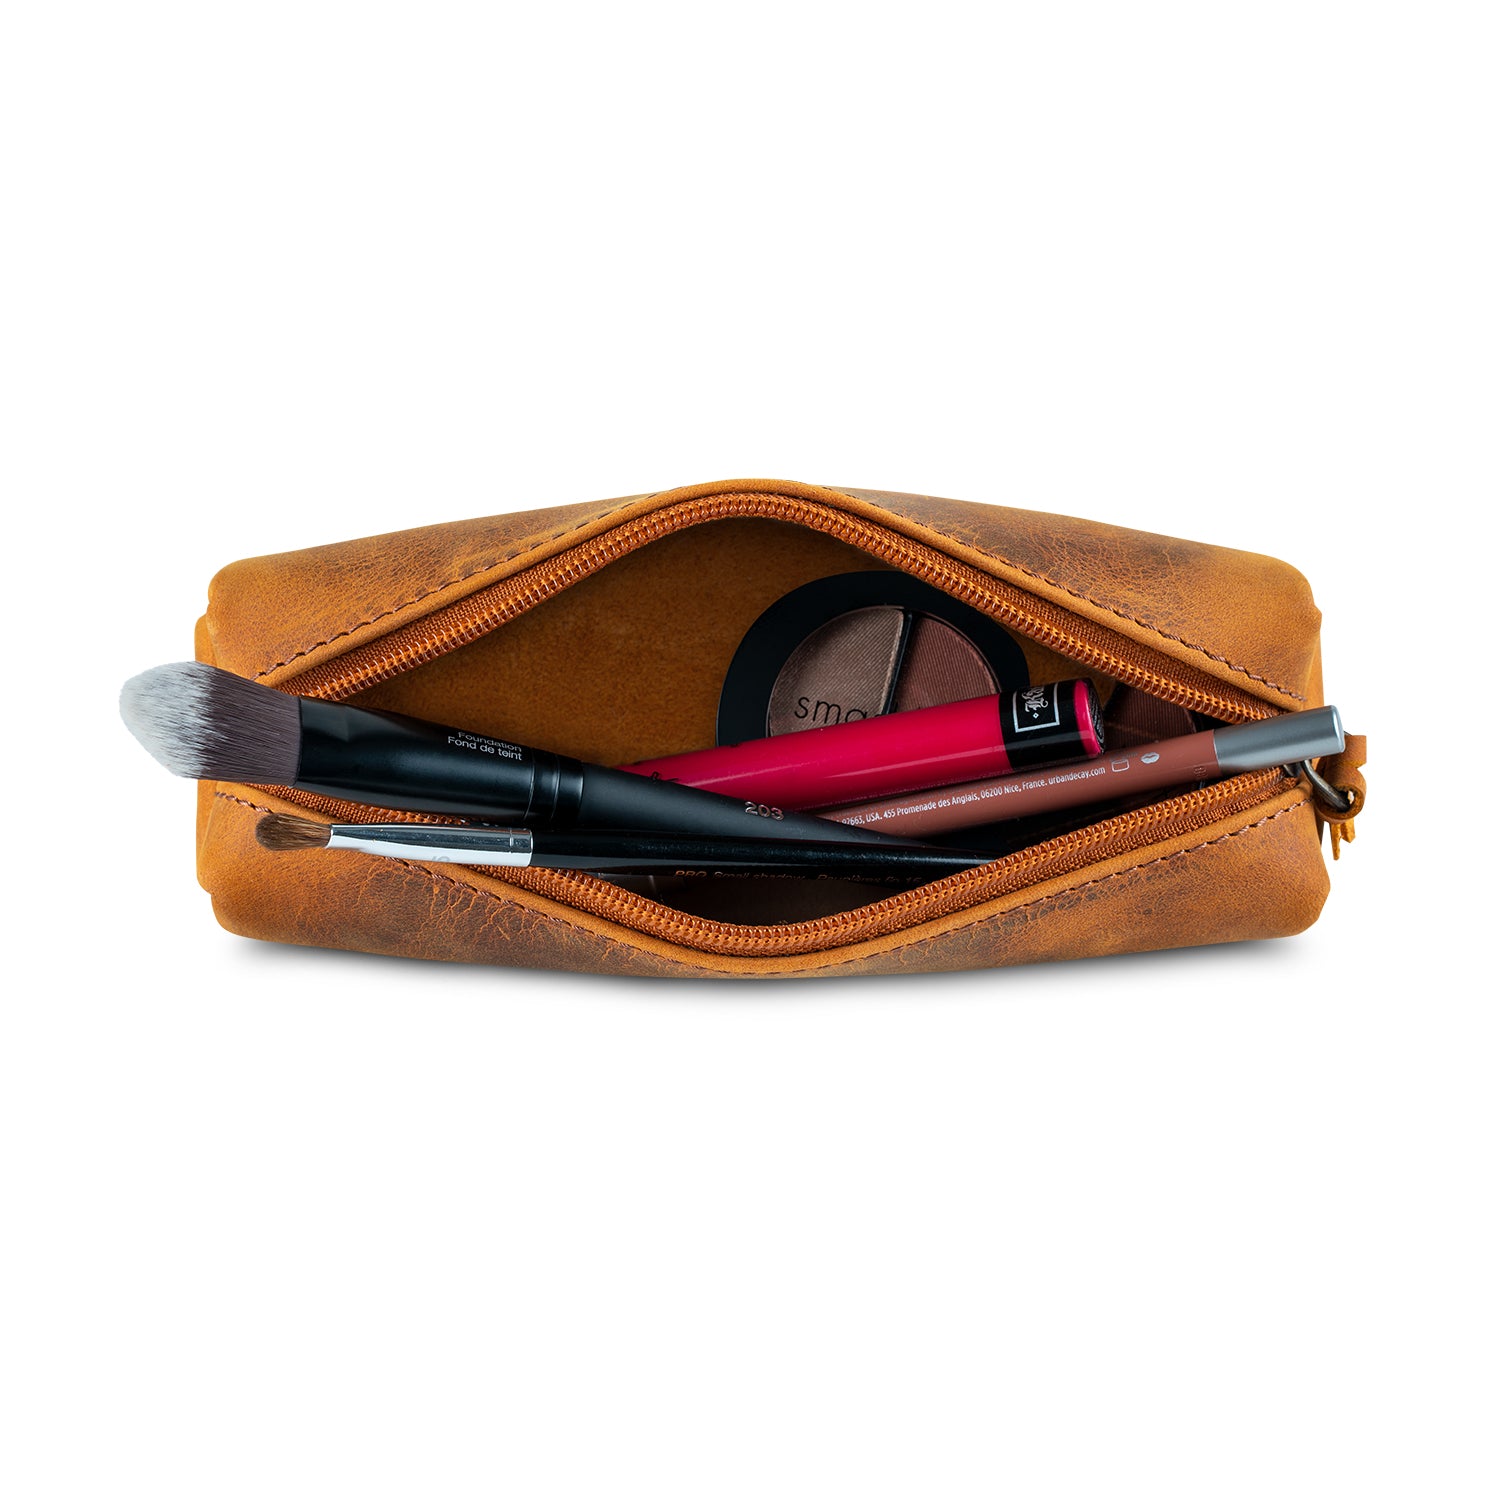 Yukon Bags Augusta Leather Pen Case - Makeup Pouch for Purse, Camel